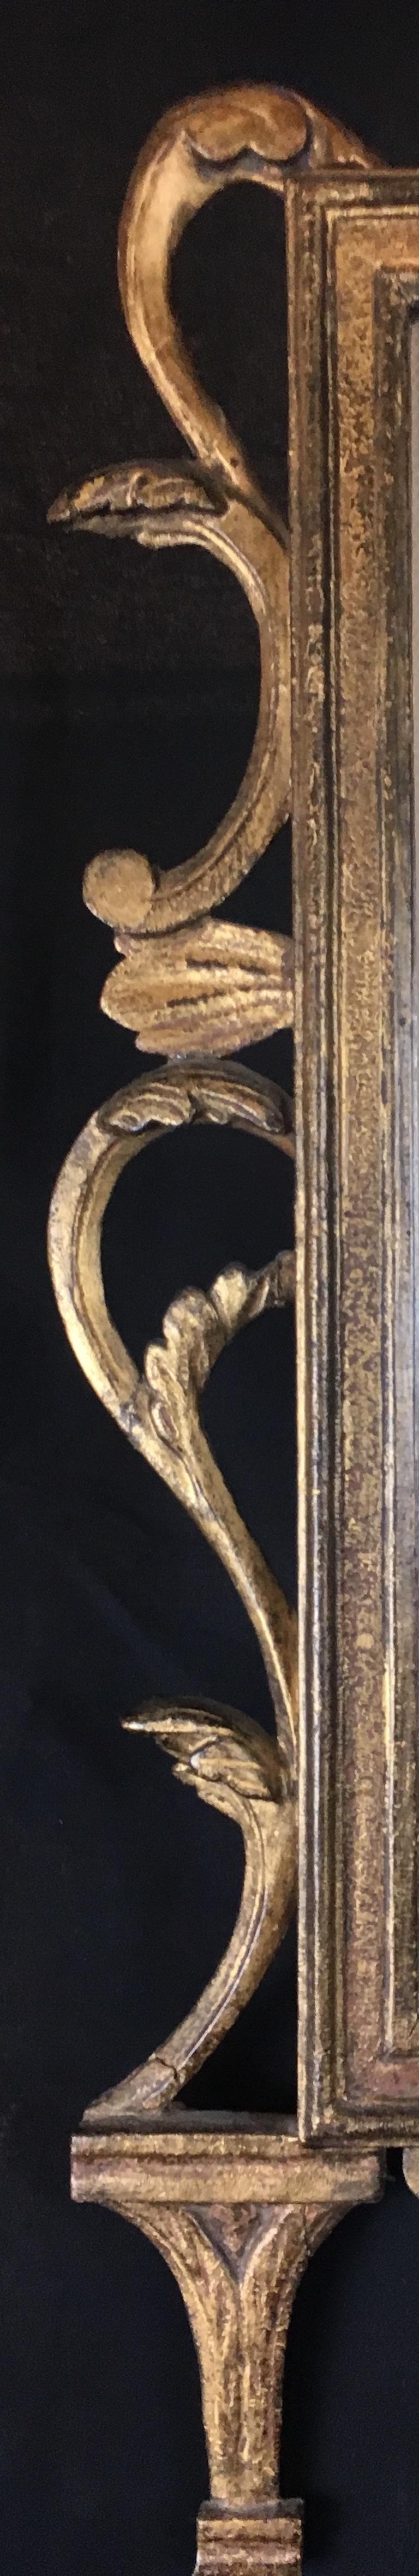 Wood 18th Century Regency Hand-Carved and Gilded Mirror, English